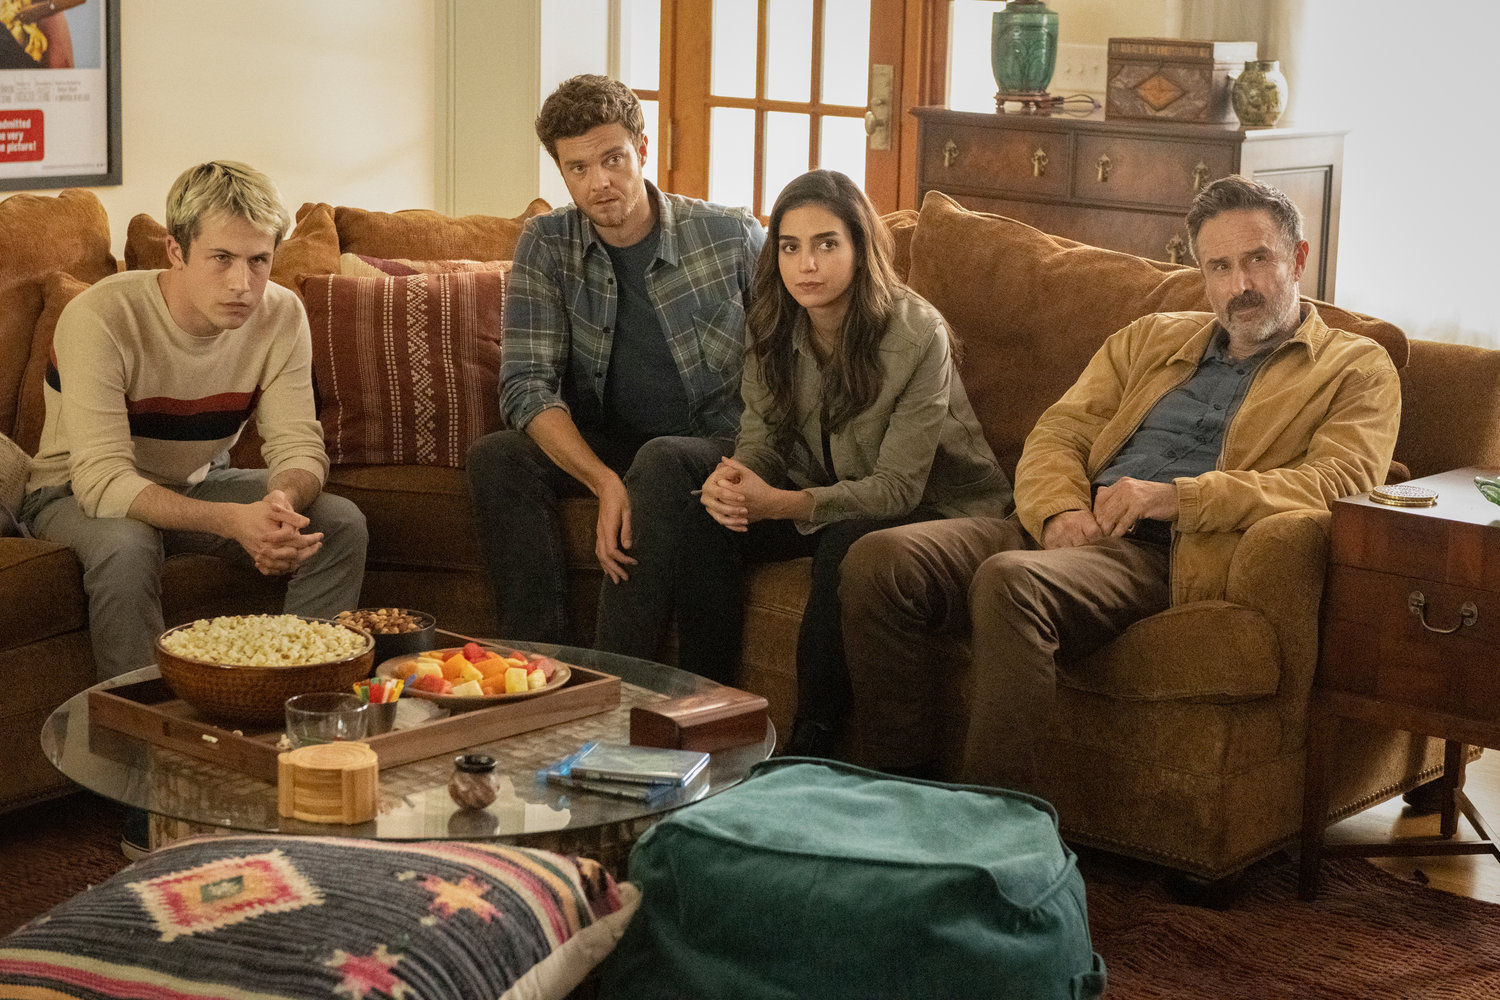 Revival — Dylan Minnette, from left, Jack Quaid, Melissa Barrera and David Arquette in a scene from "Scream."